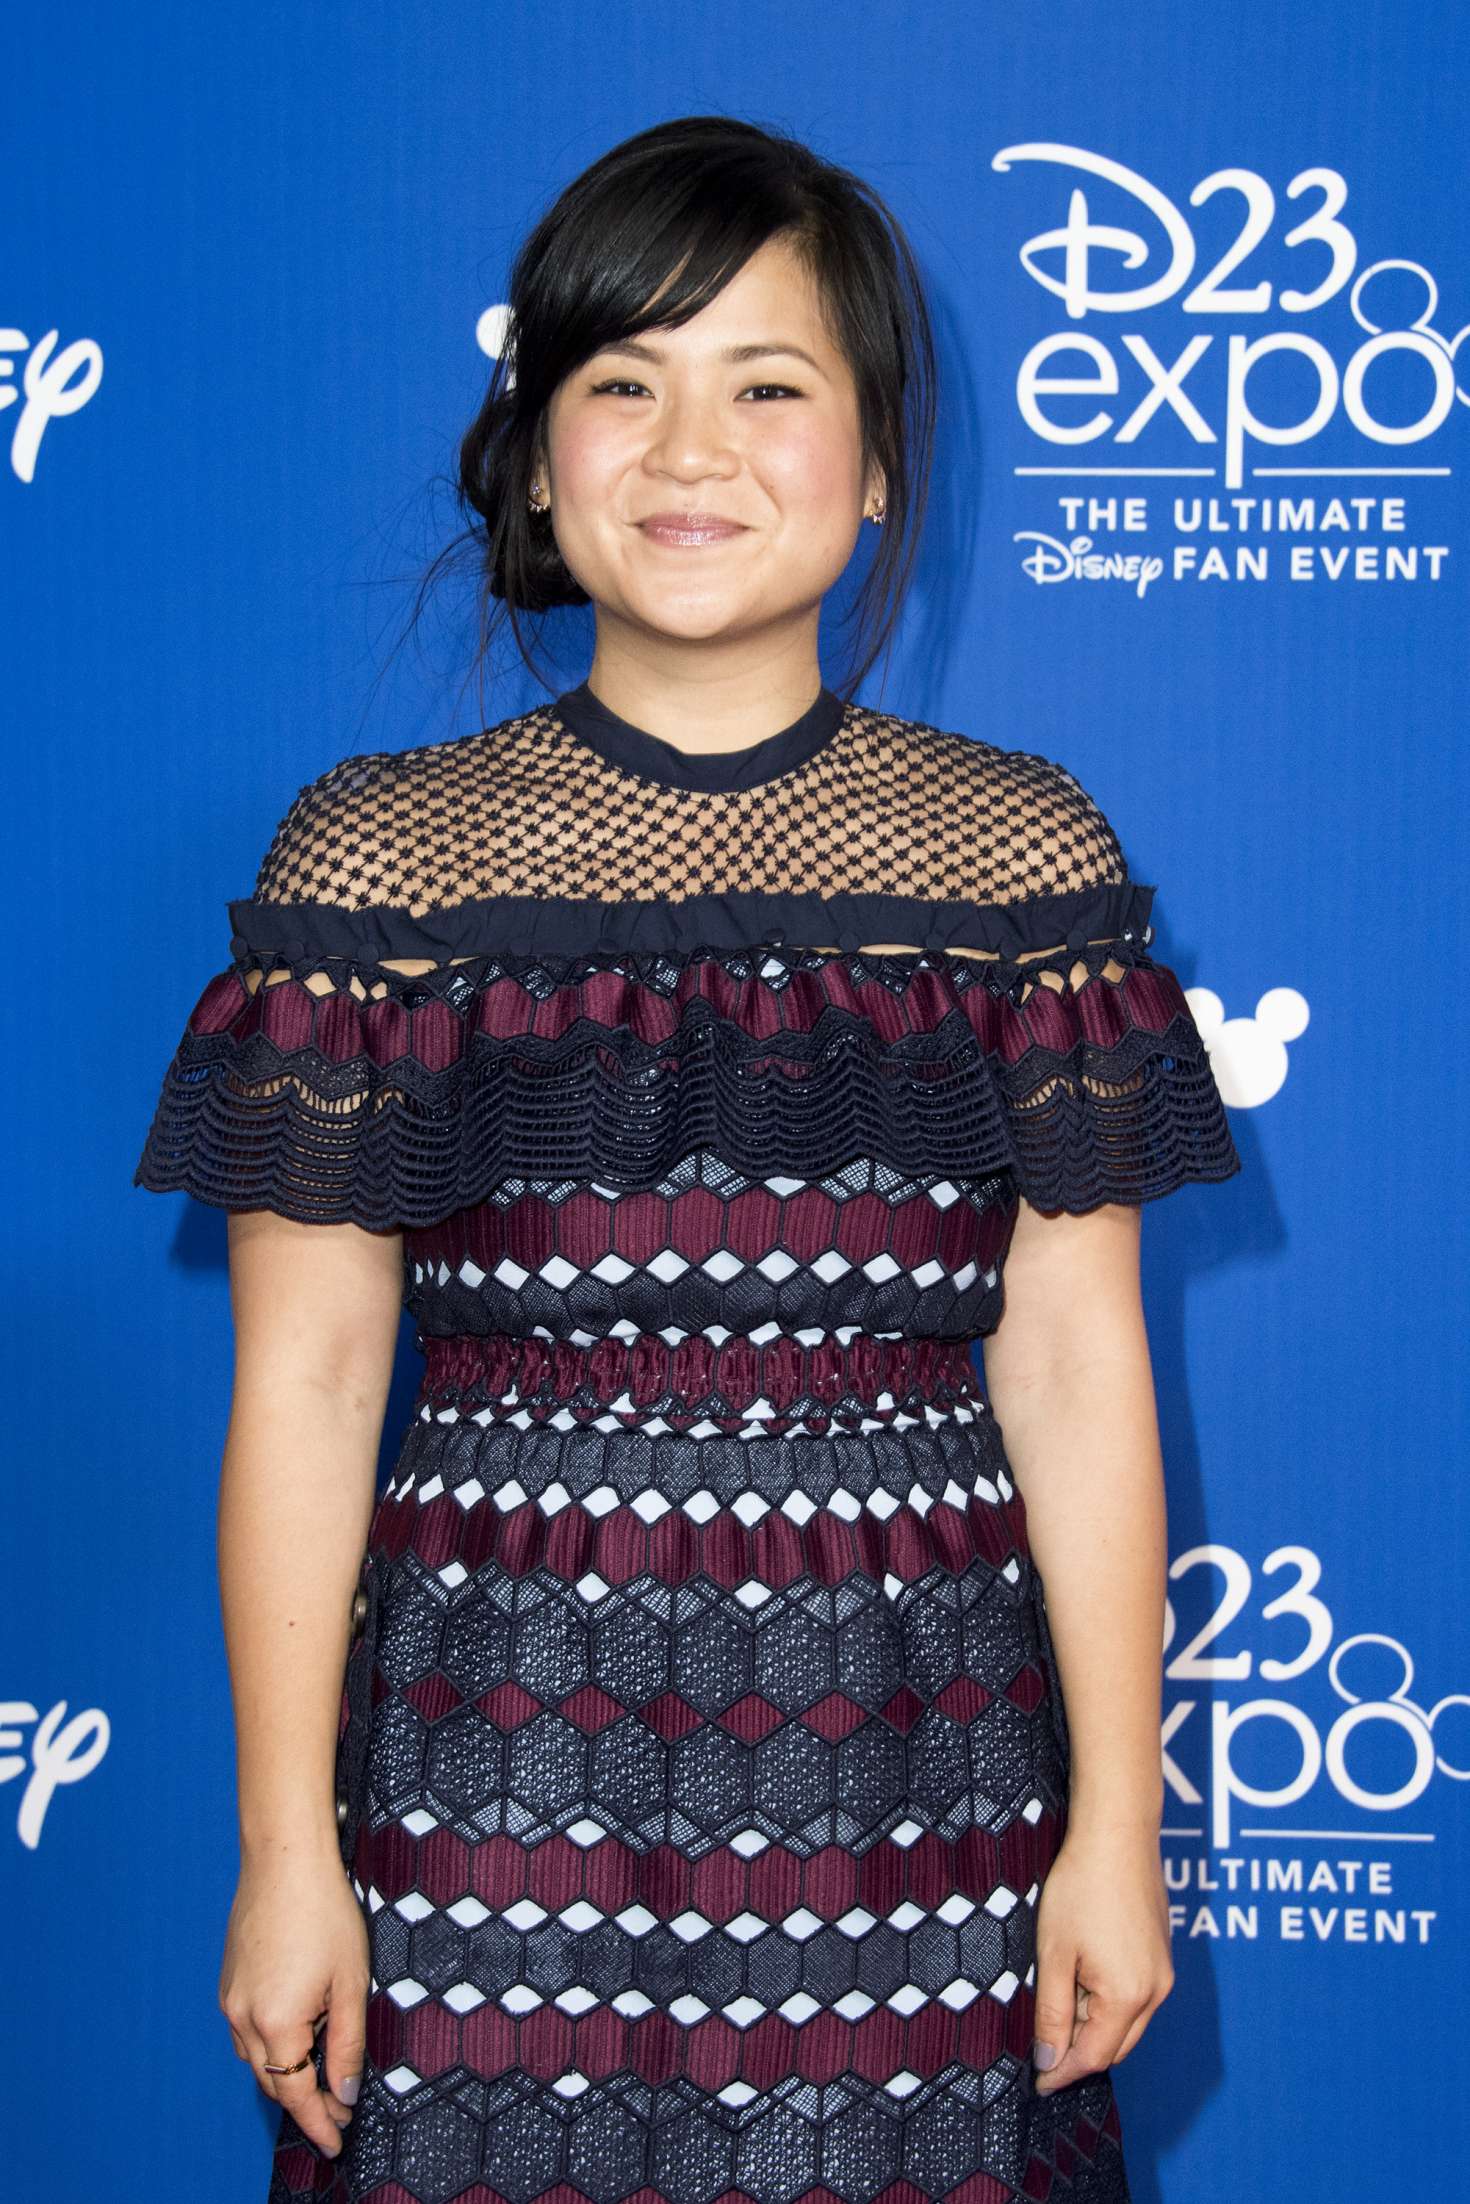 Kelly Marie Tran's D23 EXPO 2017 in Anaheim